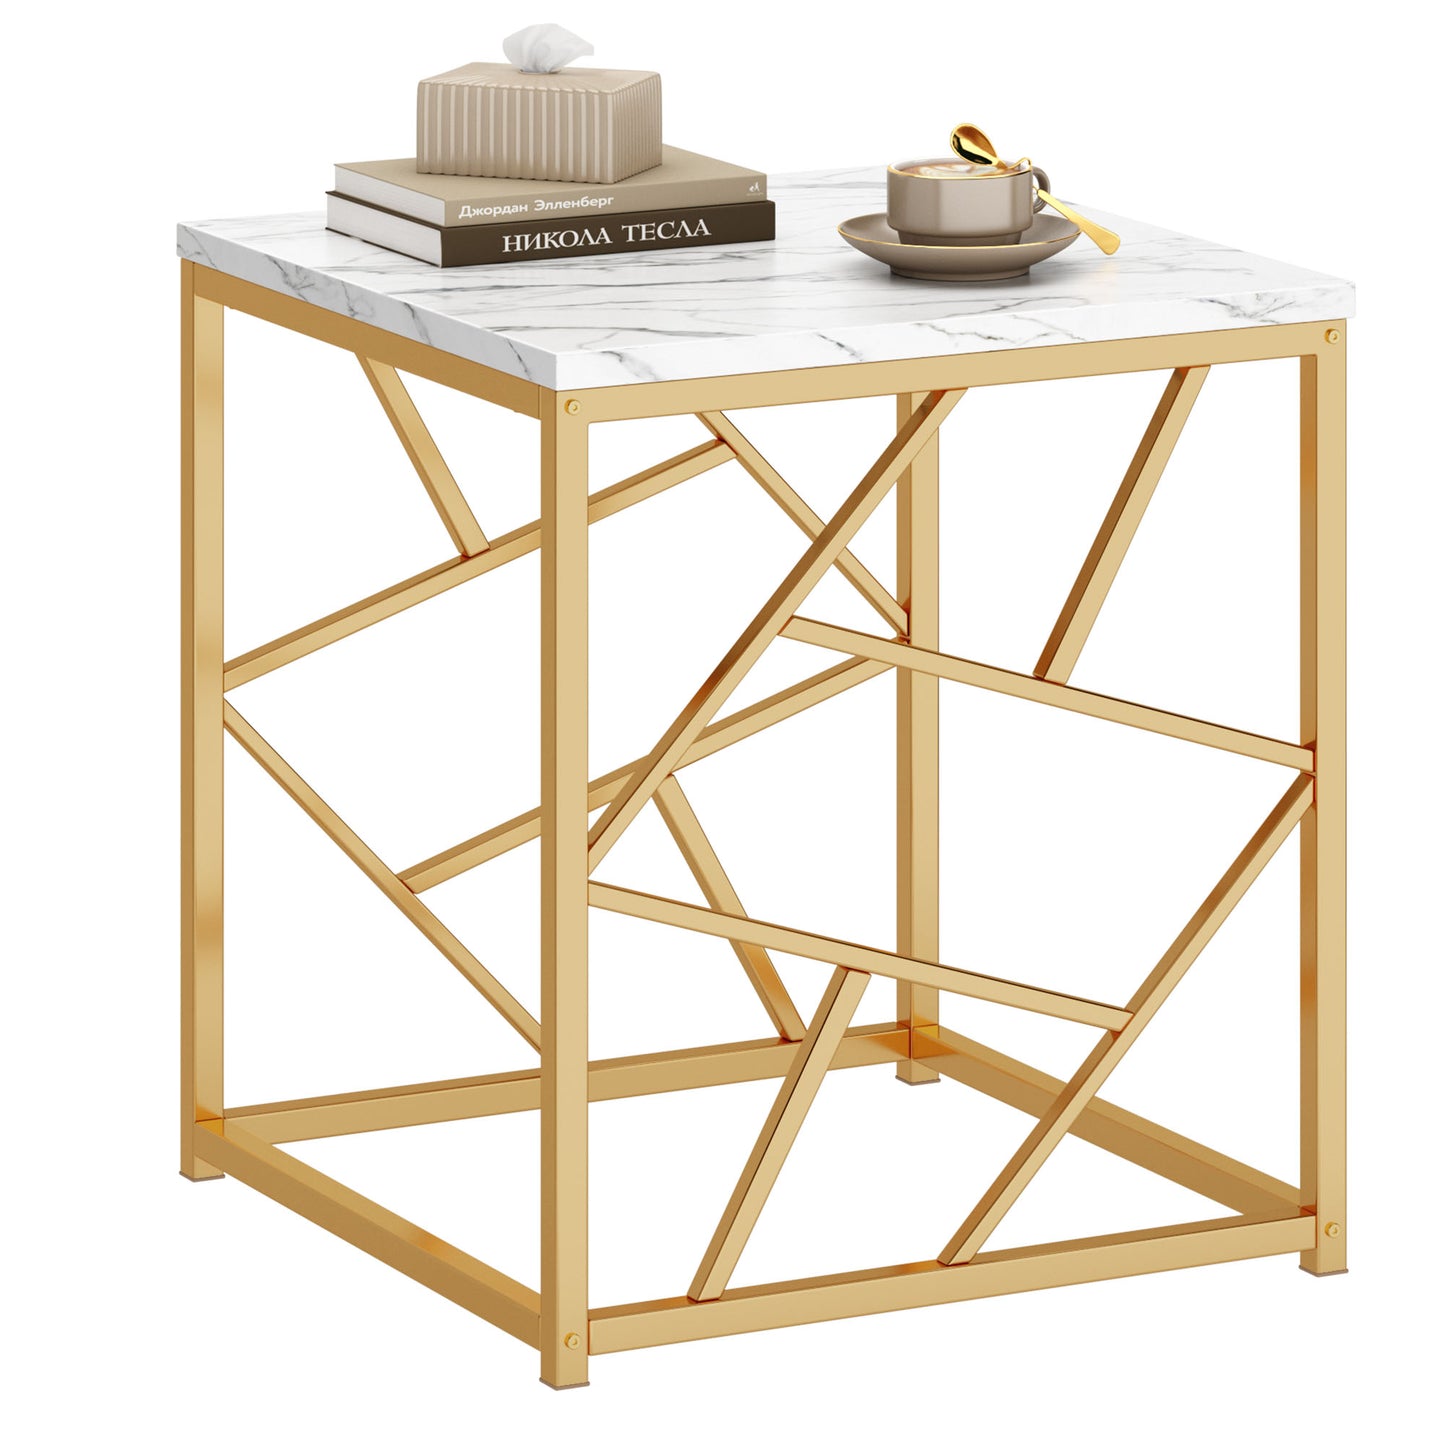 Soges Professional Square Side Table - Sturdy Structure, Durable and Stylish Coffee Table